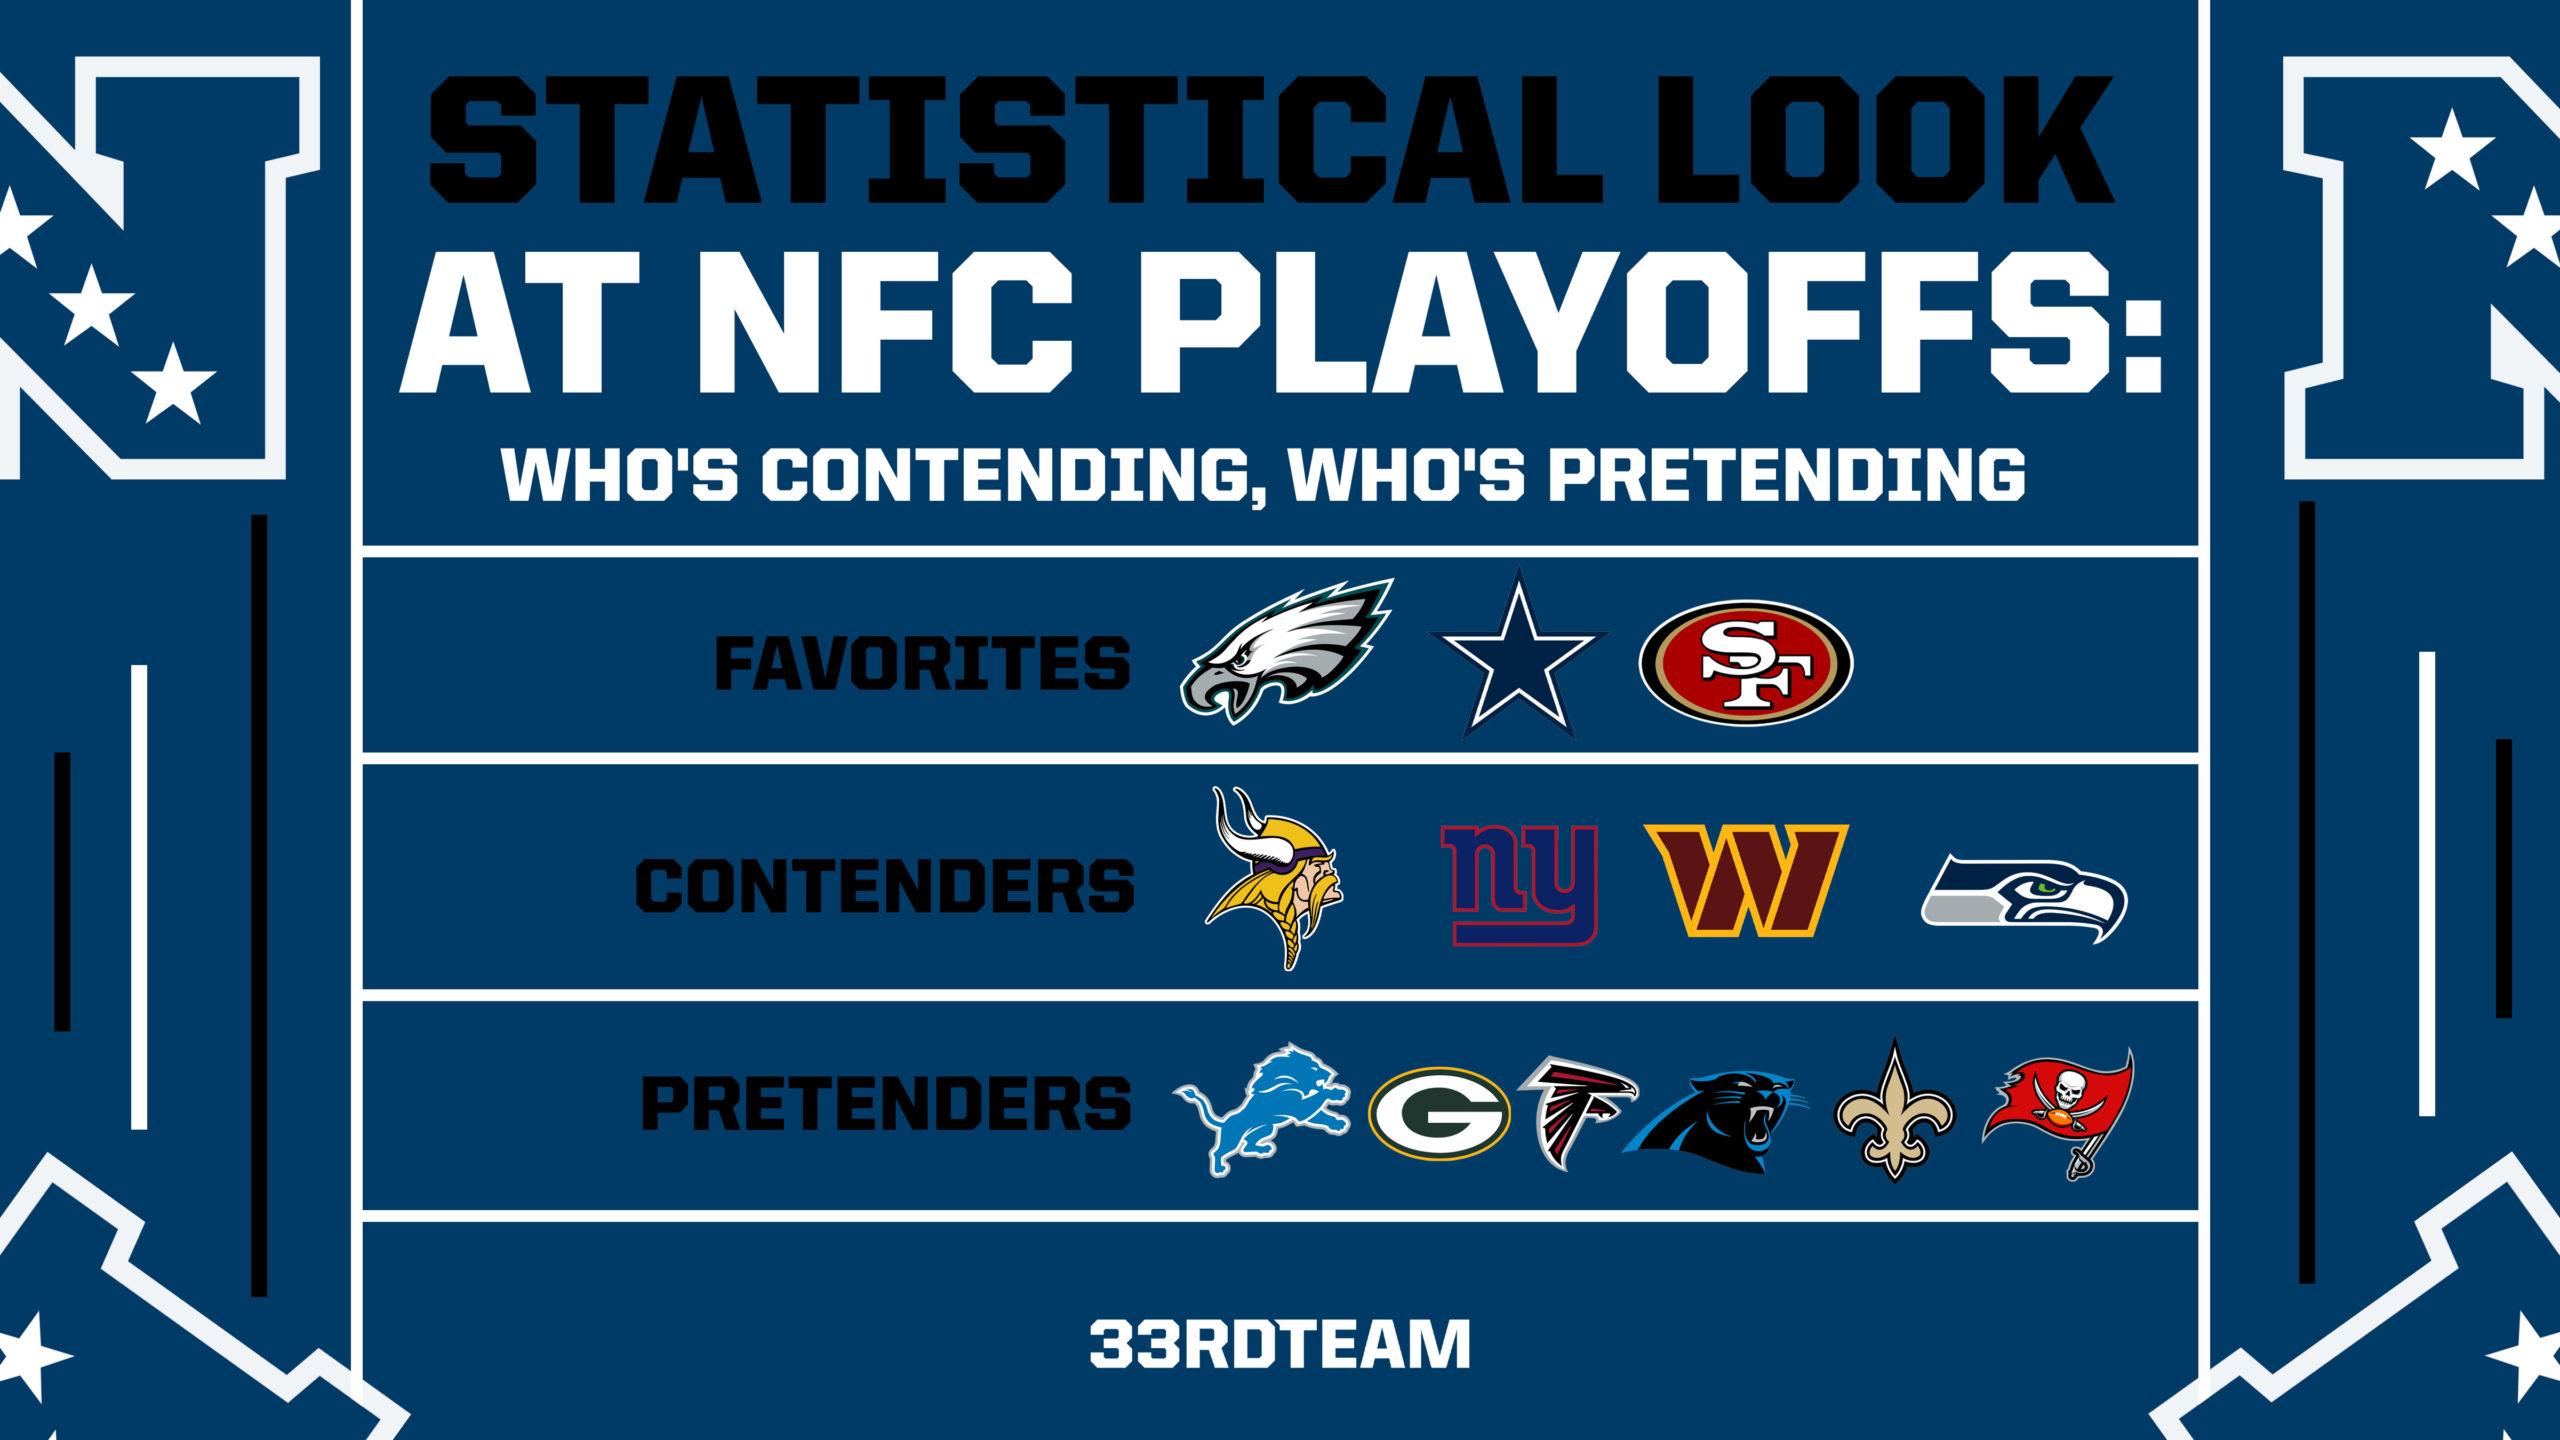 2022 NFC Playoff Picture: Who’s Contending, Who’s Pretending?